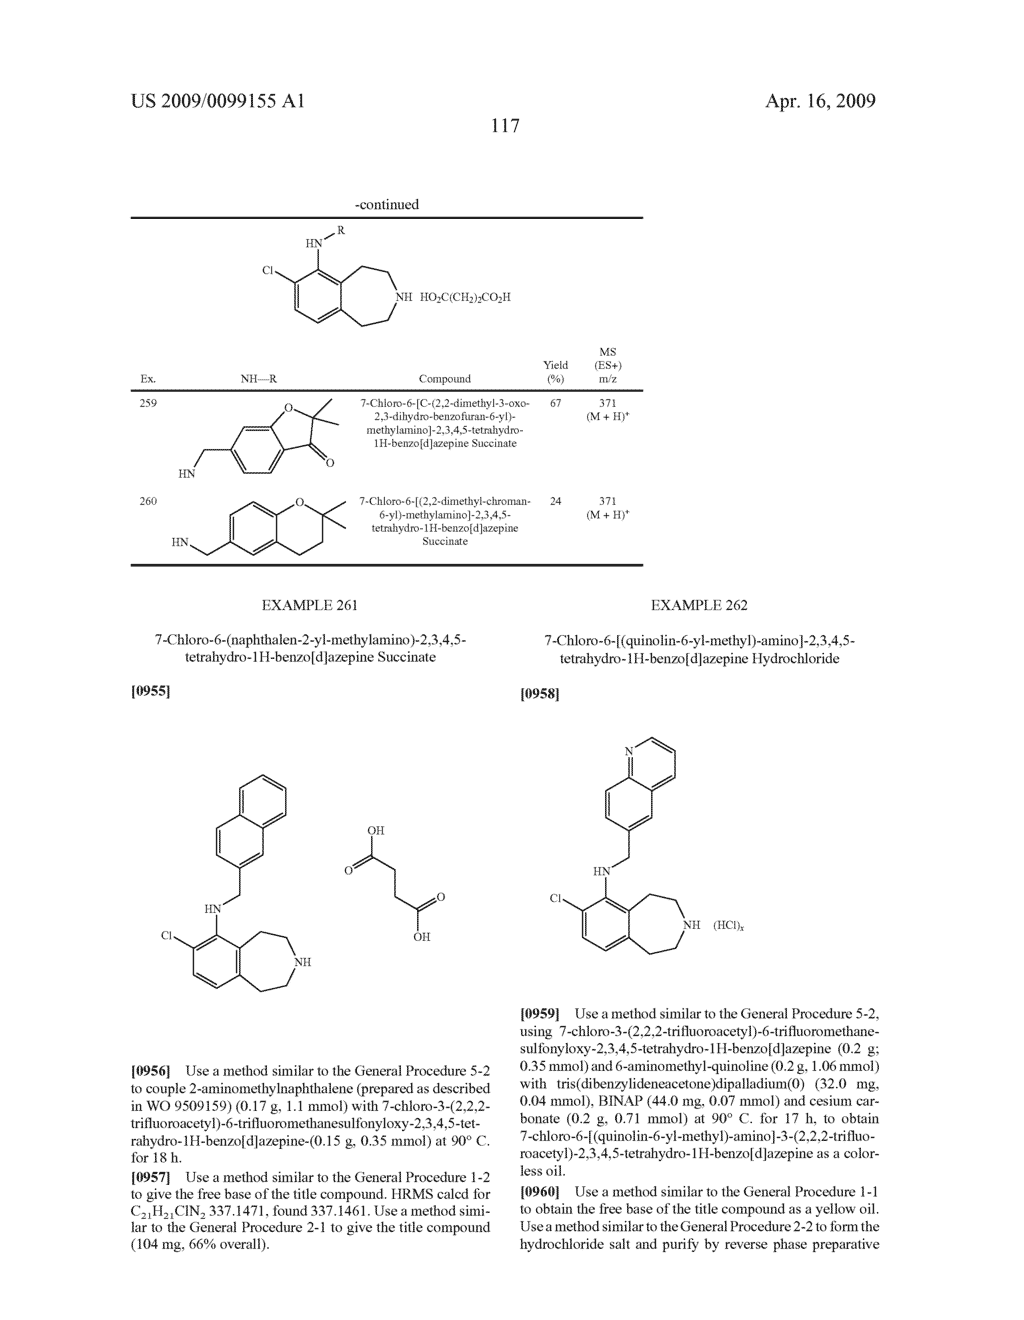 6-SUBSTITUTED 2,3,4,5-TETRAHYDRO-1H-BENZO[D]AZEPINES AS 5-HT2C RECEPTOR AGONISTS - diagram, schematic, and image 118